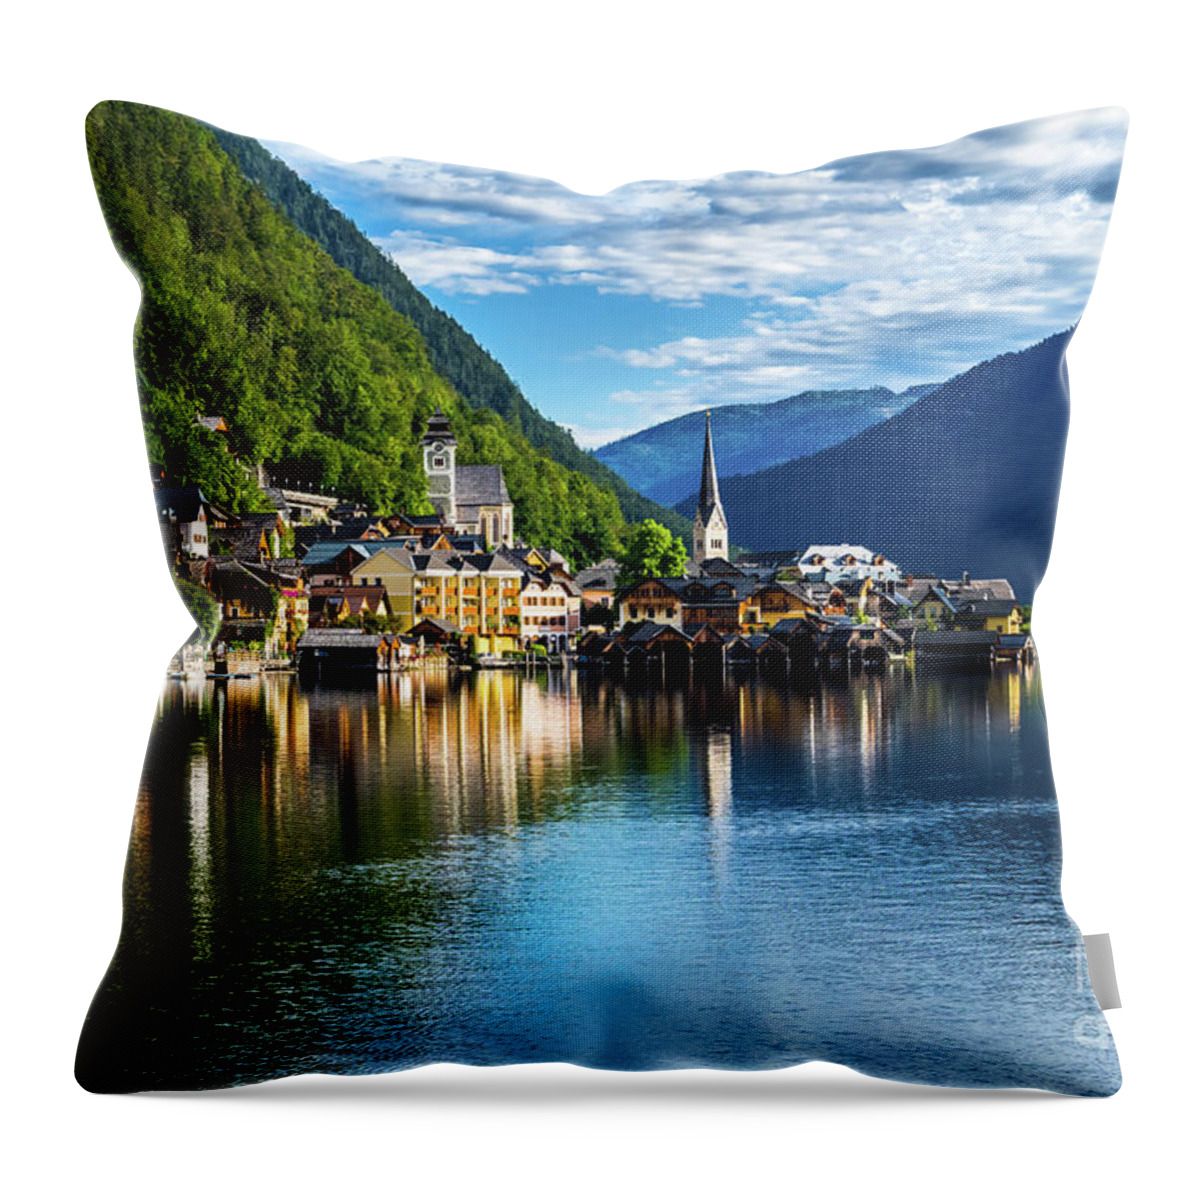 Austria Throw Pillow featuring the photograph Picturesque Lakeside Town Hallstatt At Lake Hallstaetter See In Austria by Andreas Berthold